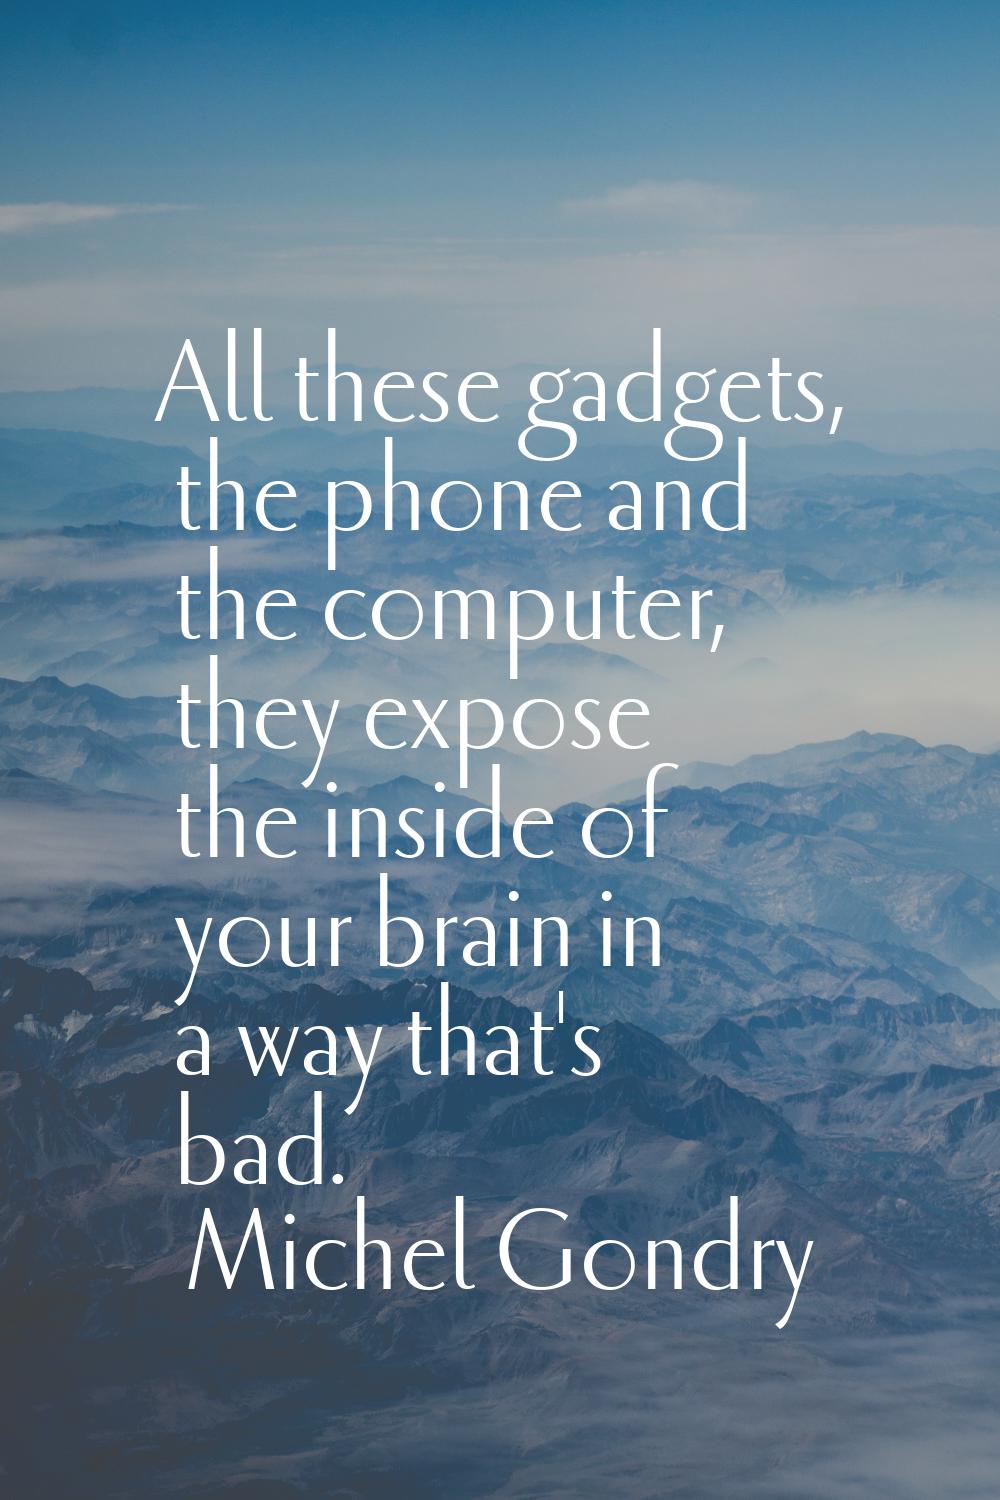 All these gadgets, the phone and the computer, they expose the inside of your brain in a way that's